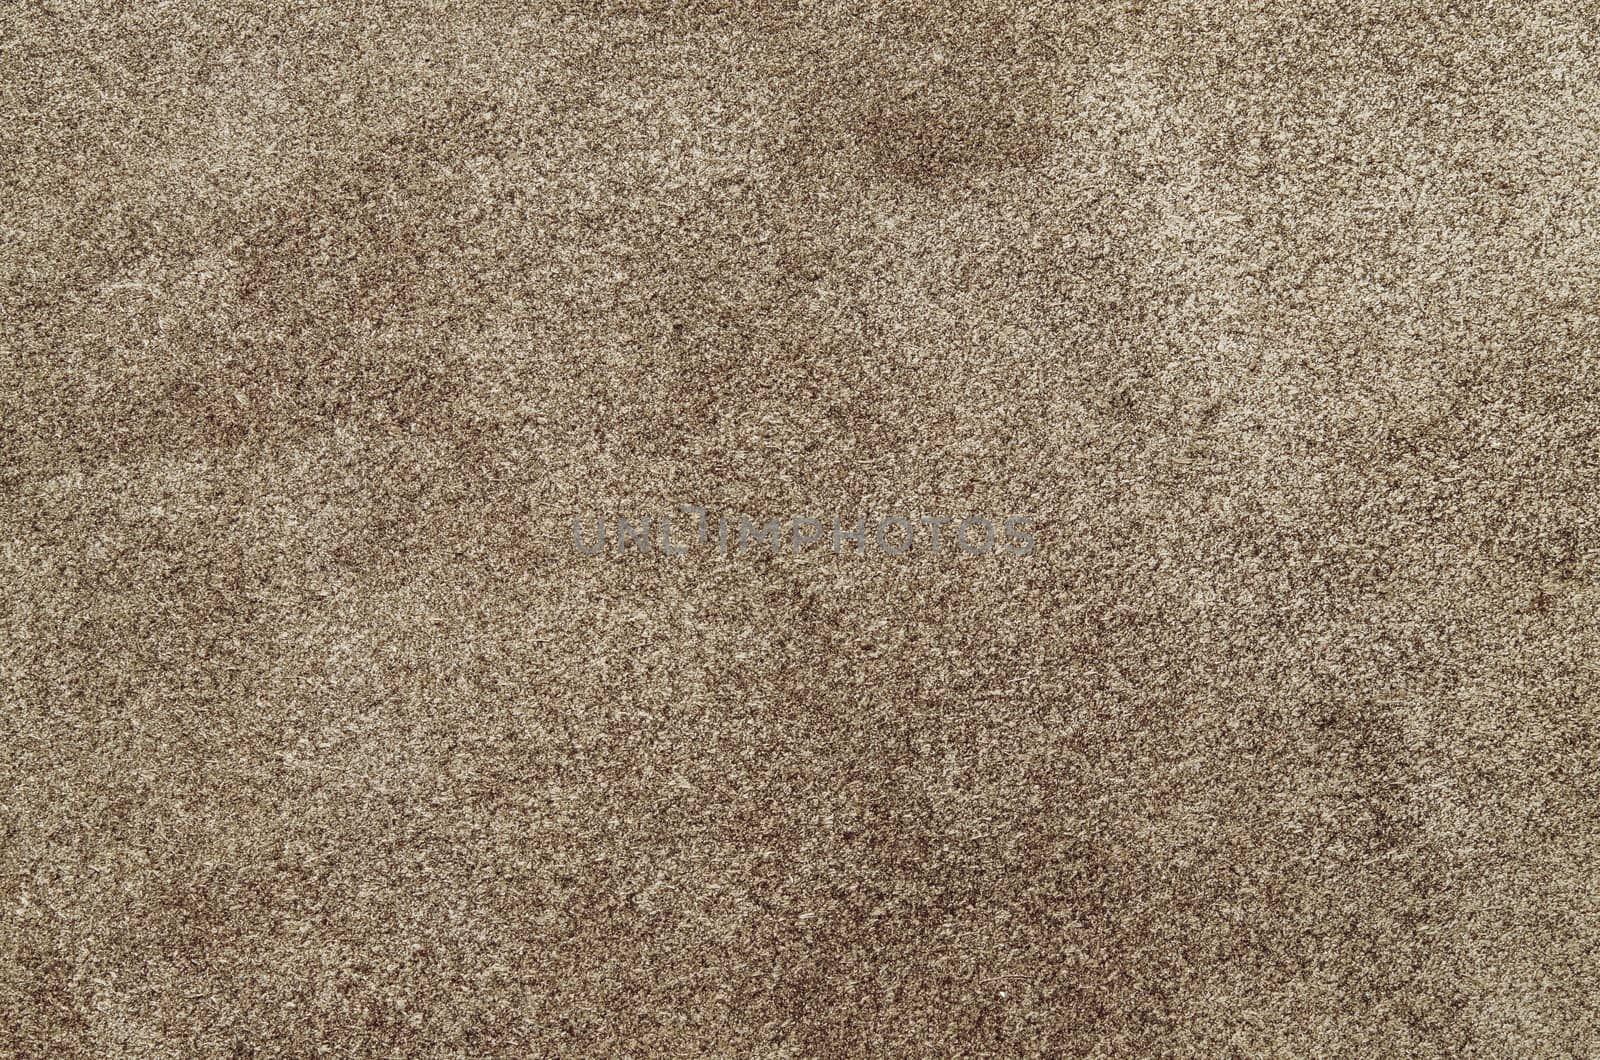 Brown suede soft leather as texture background. Close up shammy leather texture